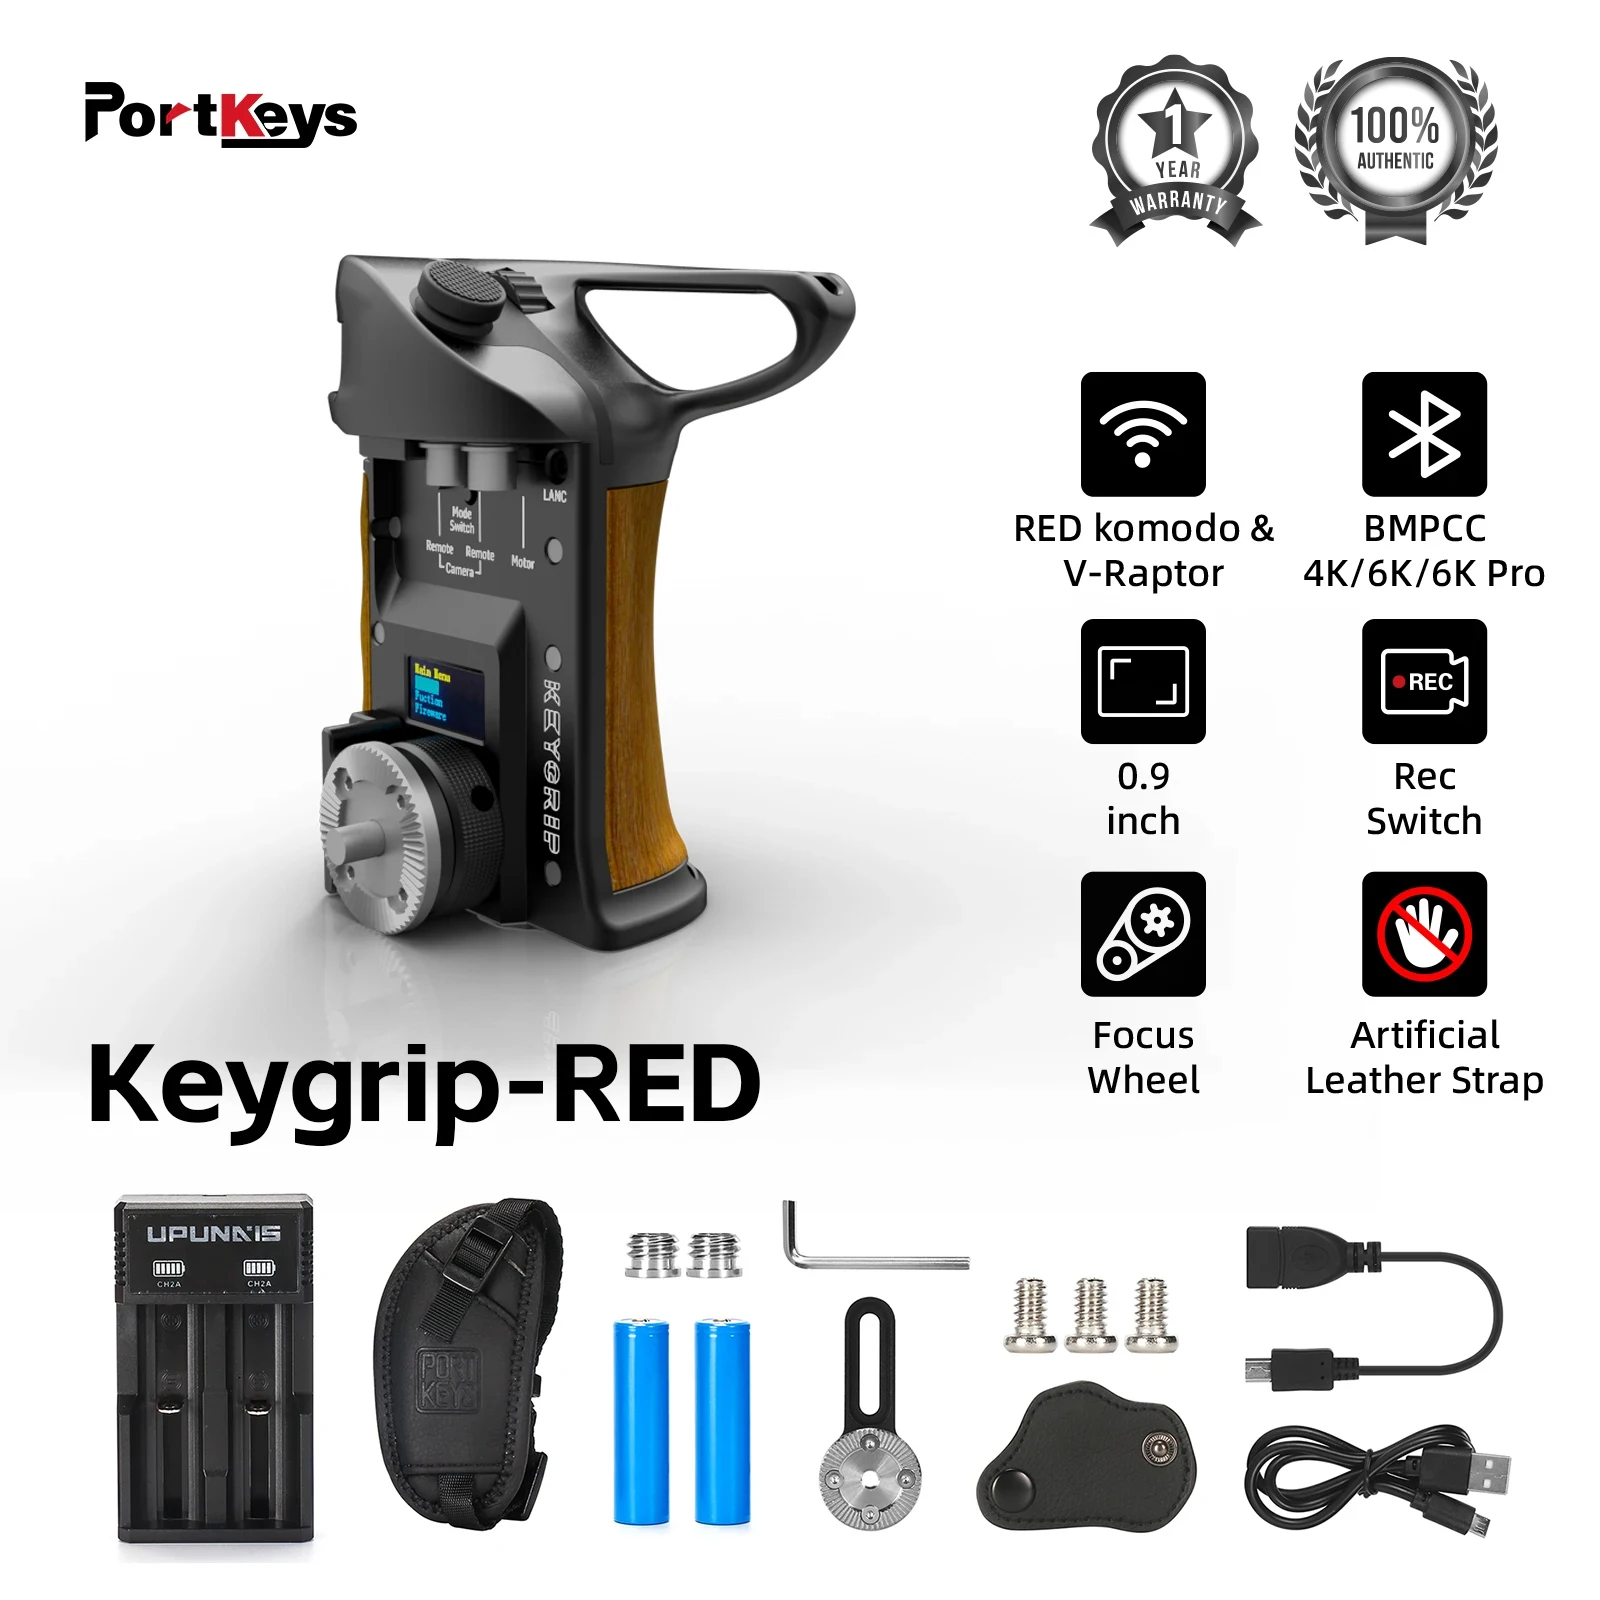 

Portkeys Keygrip-RED Right Handle Wireless Wired Camera Conctrol RED Komodo V-Raptor BMPCC Z CAM E2-F6 with 0.9 Inch OLED Screen